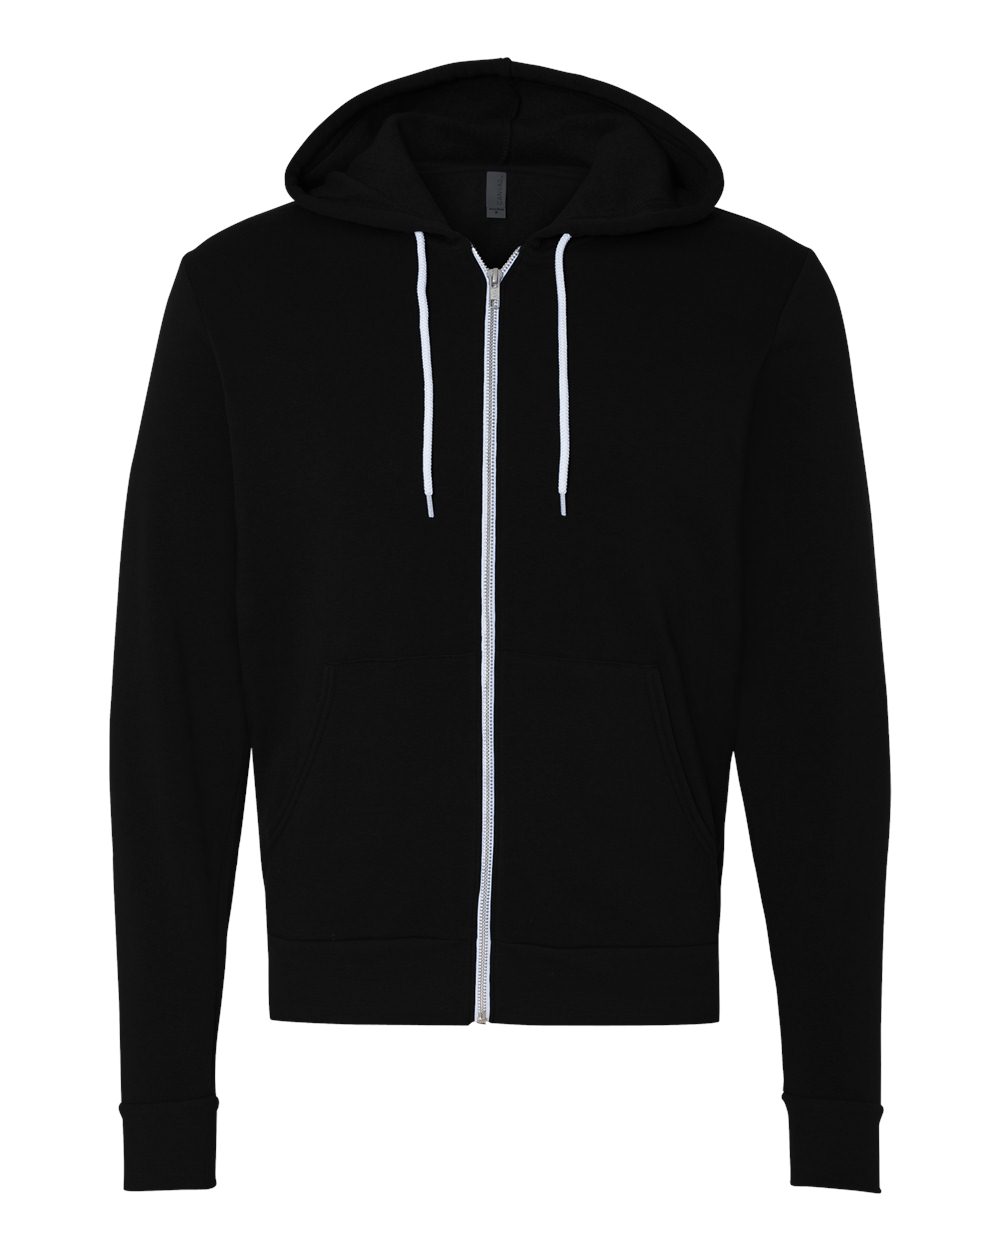 Game Changer Therapy Services Zip Up Hooded Sweatshirt - White Logo